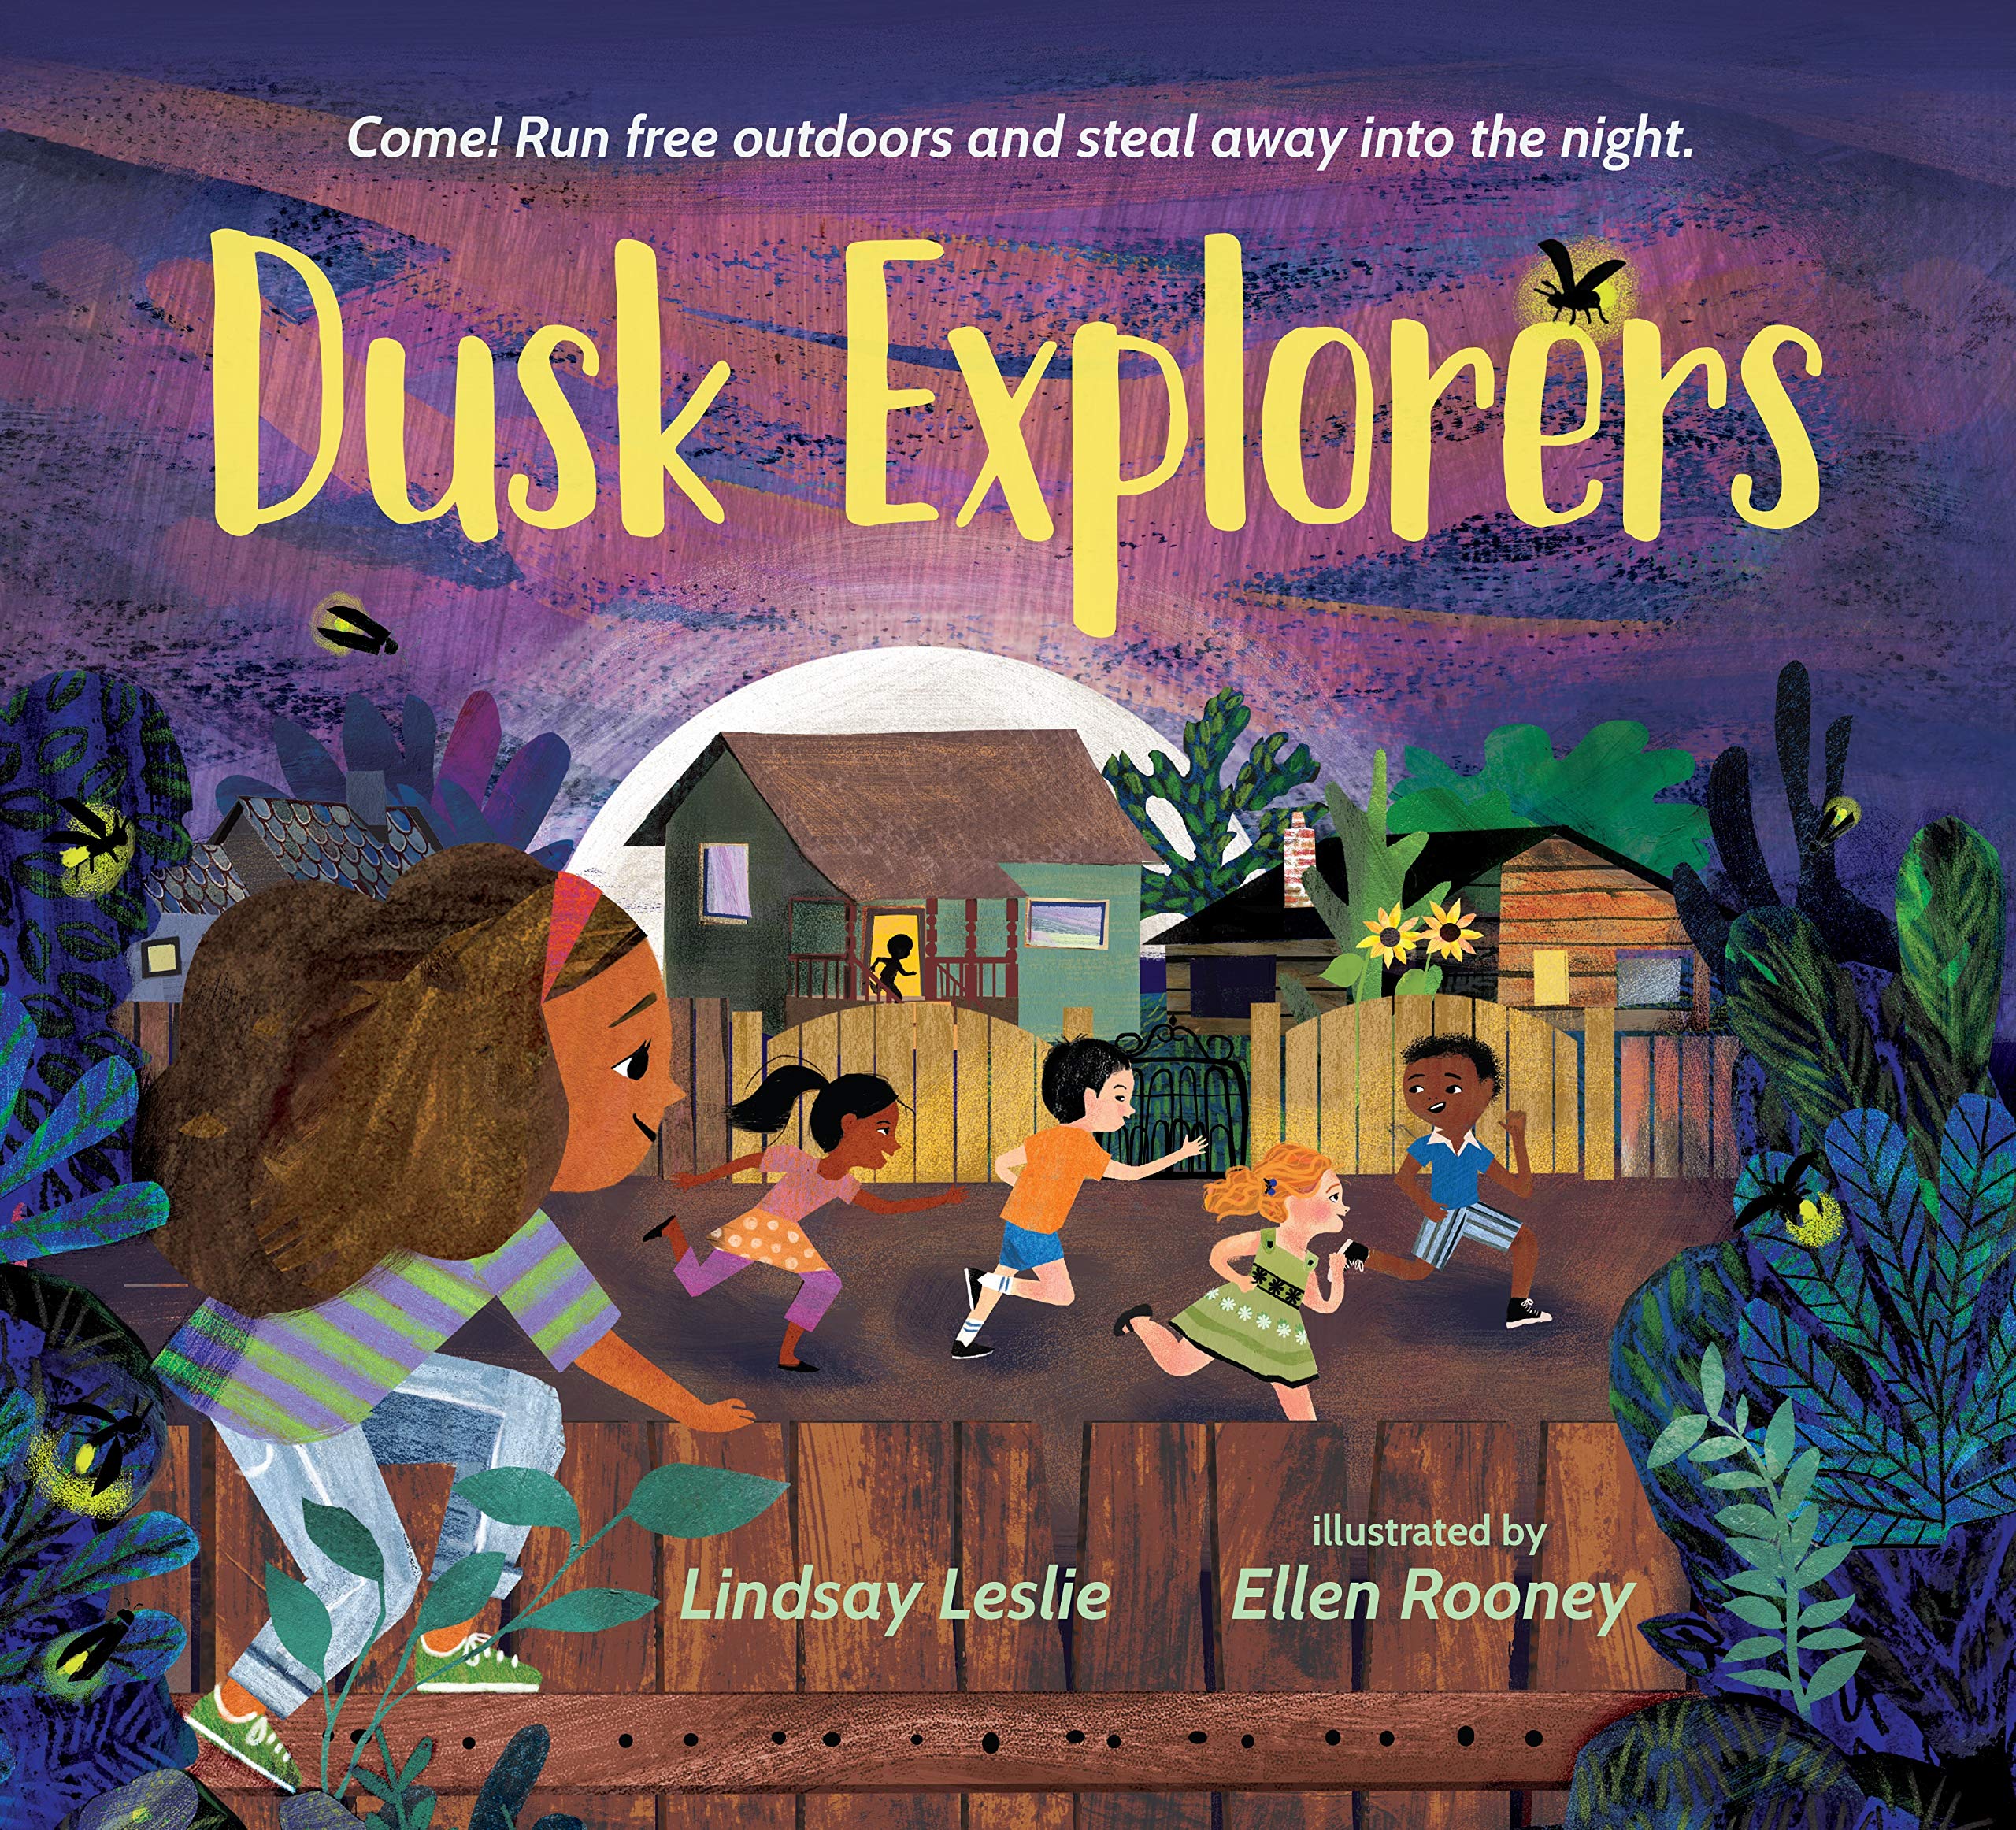 speech and language teaching concepts for Dusk Explorers in speech therapy